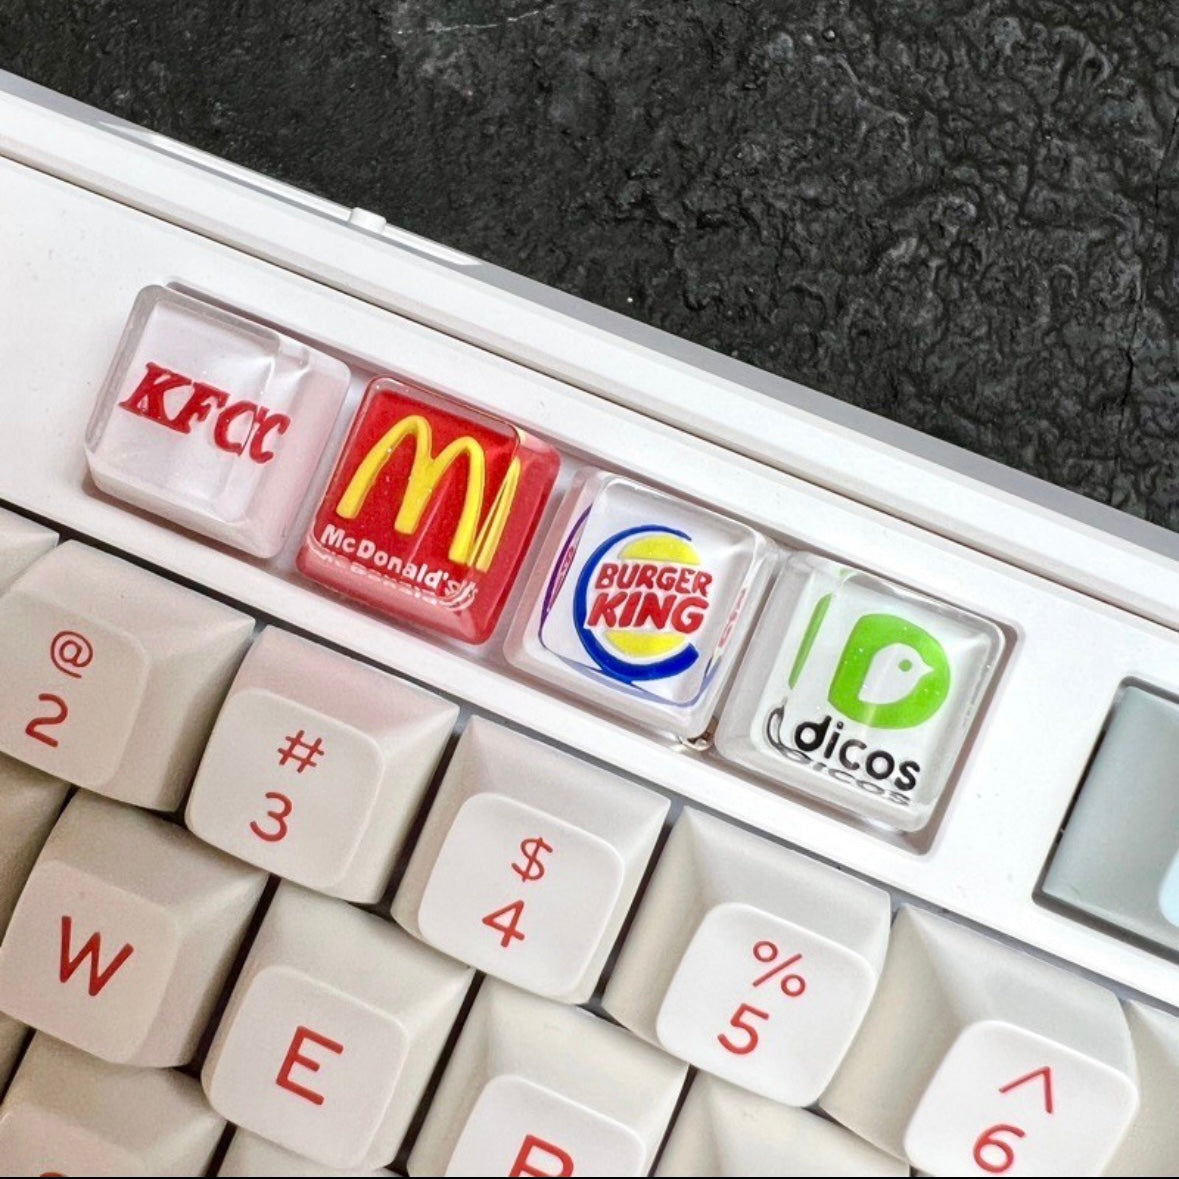 "Show your love for fast food and coffee giants with our custom artisan keycaps featuring iconic logos from Burger King, McDonald's, Starbucks, and KFC. These keycaps are a unique blend of foodie culture and keyboard aesthetics. Crafted with precision, they make a deliciously stylish addition to your setup. Express your passion for your favorite brands with these eye-catching keycaps." 🍔🍟🍗🍕☕💻 #KeyboardAccessories #ArtisanKeycaps #FastFoodLove